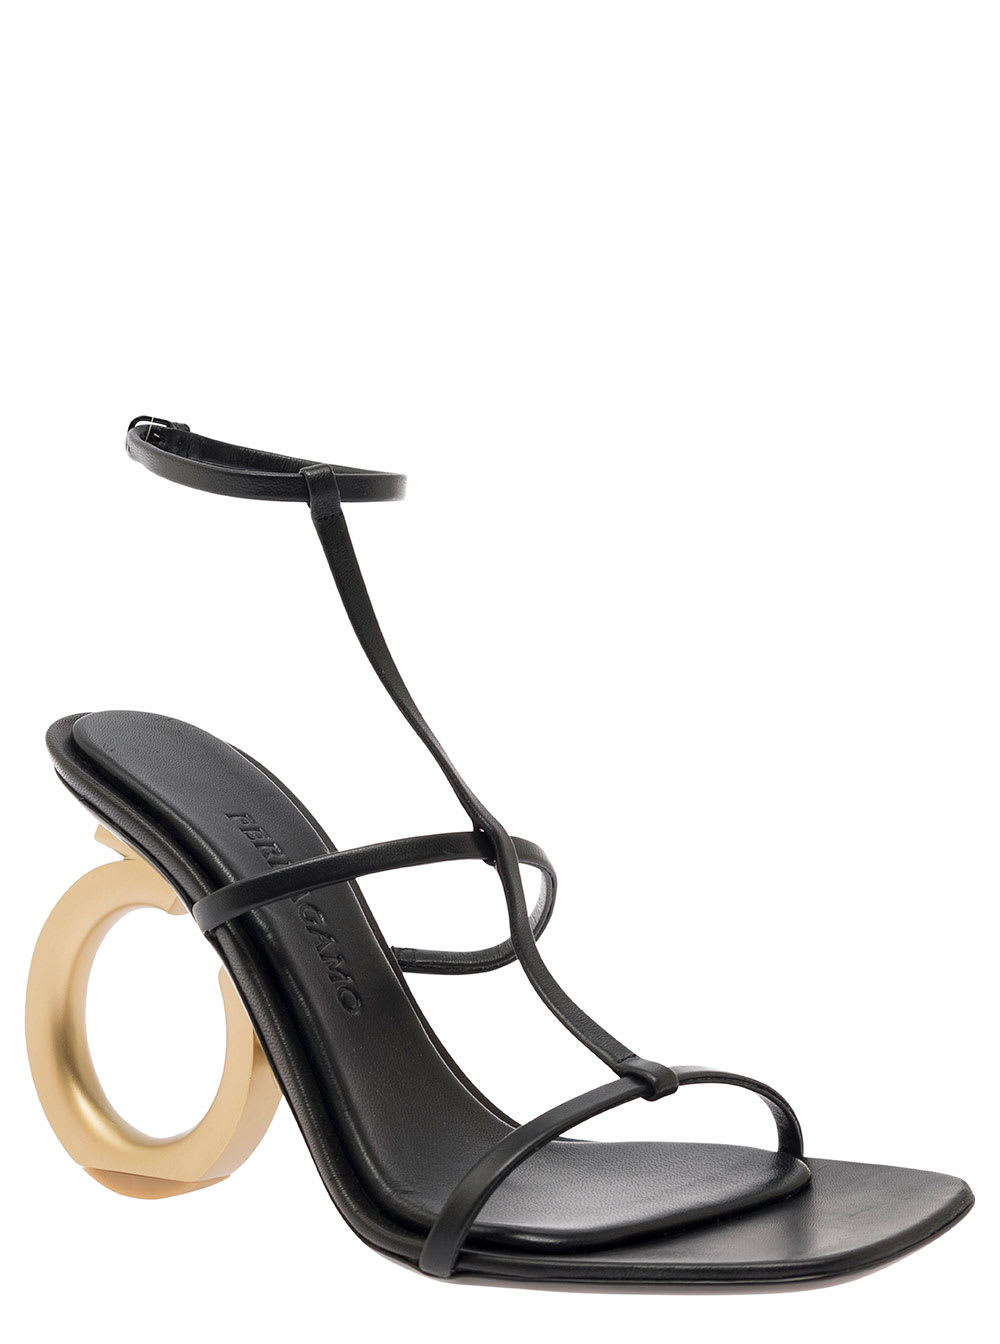 elina Black Sandals With Sculptural Gancini Heel In Leather Woman